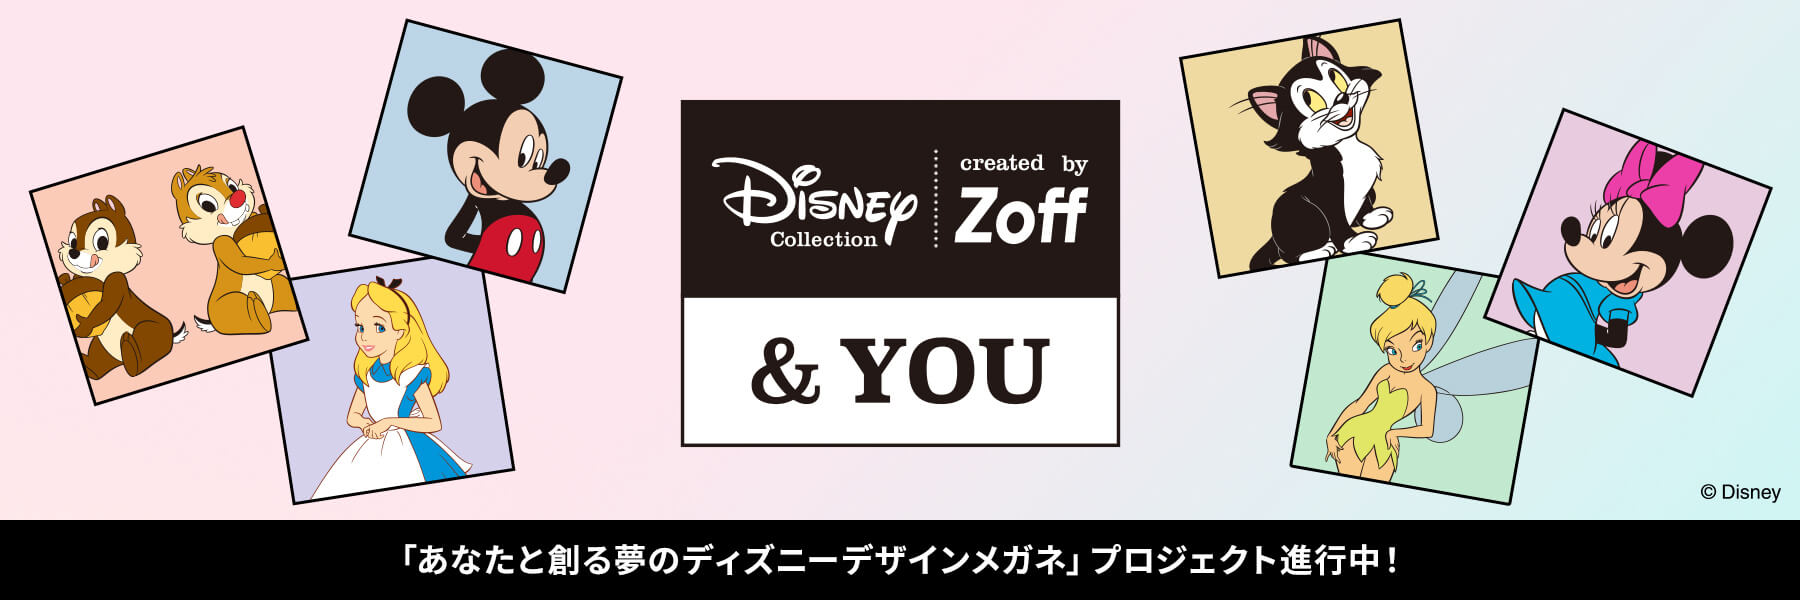 Zoff Disney Collection “& YOU” 夢のディズニーデザインメガネデザインモチーフ投票実施中！